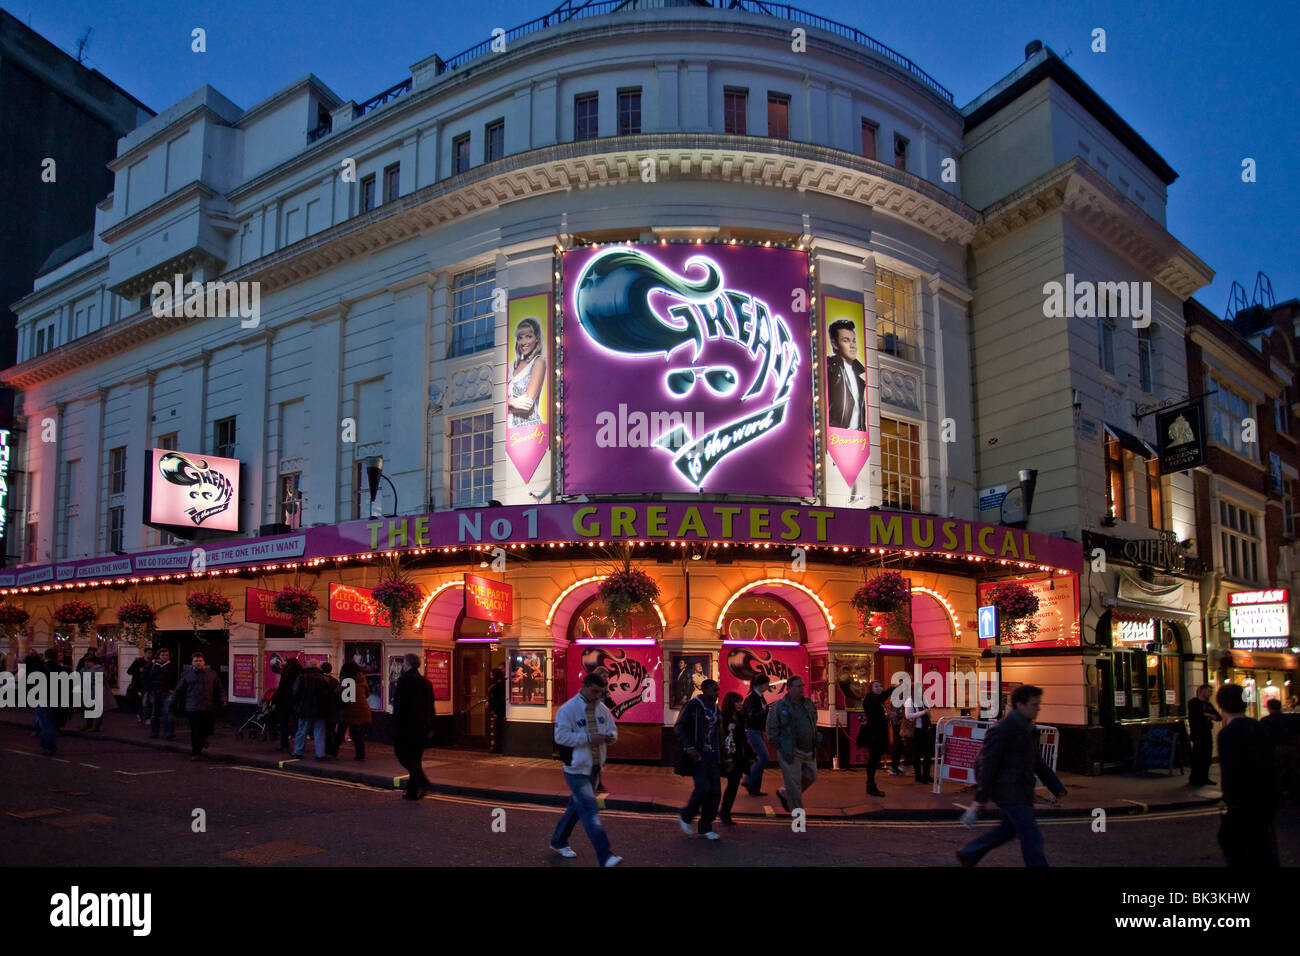 The Piccadilly Theatre, Denman Street, London West End, UK Stock Photo